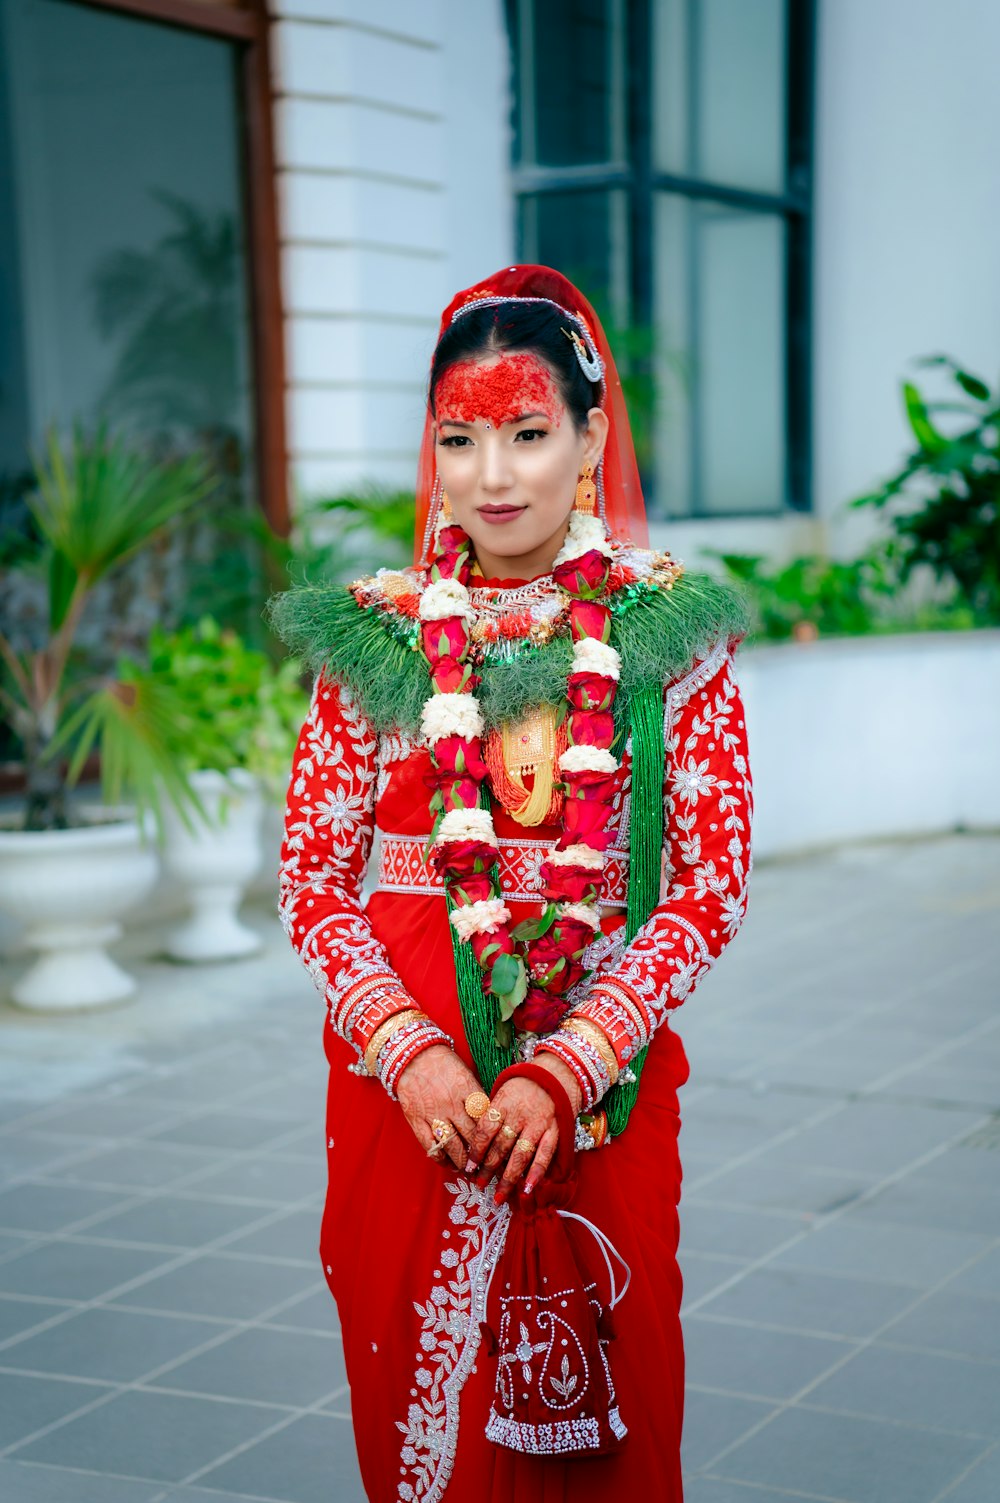 a woman dressed in a red and white outfit